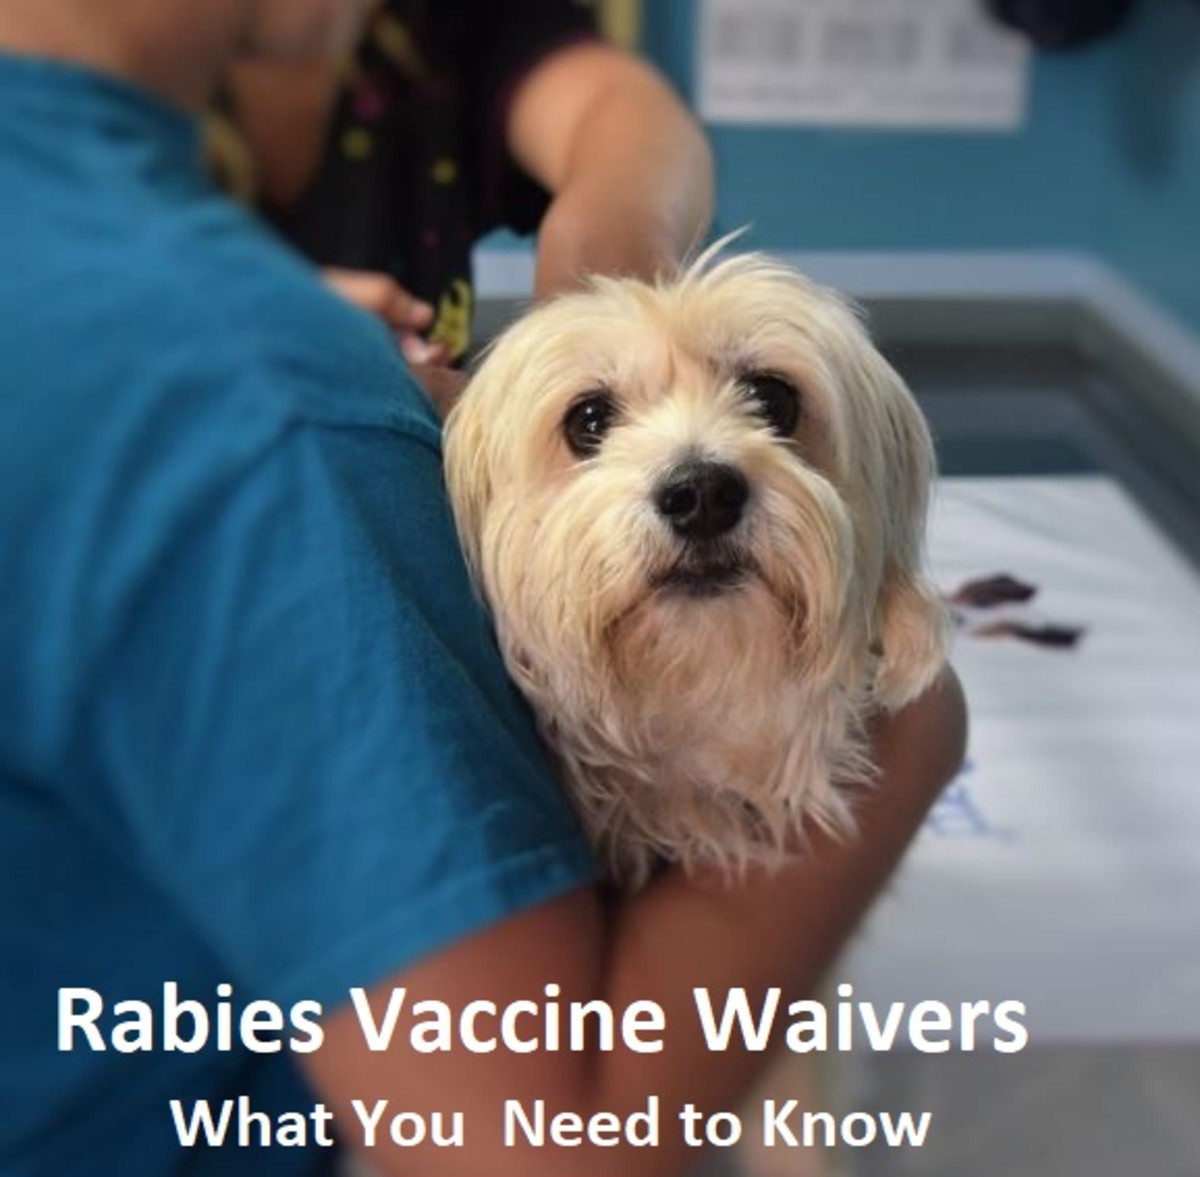 Stay Up-to-Date On Your Pet's Health: How Often Do Dogs Need A Rabies Vaccine?